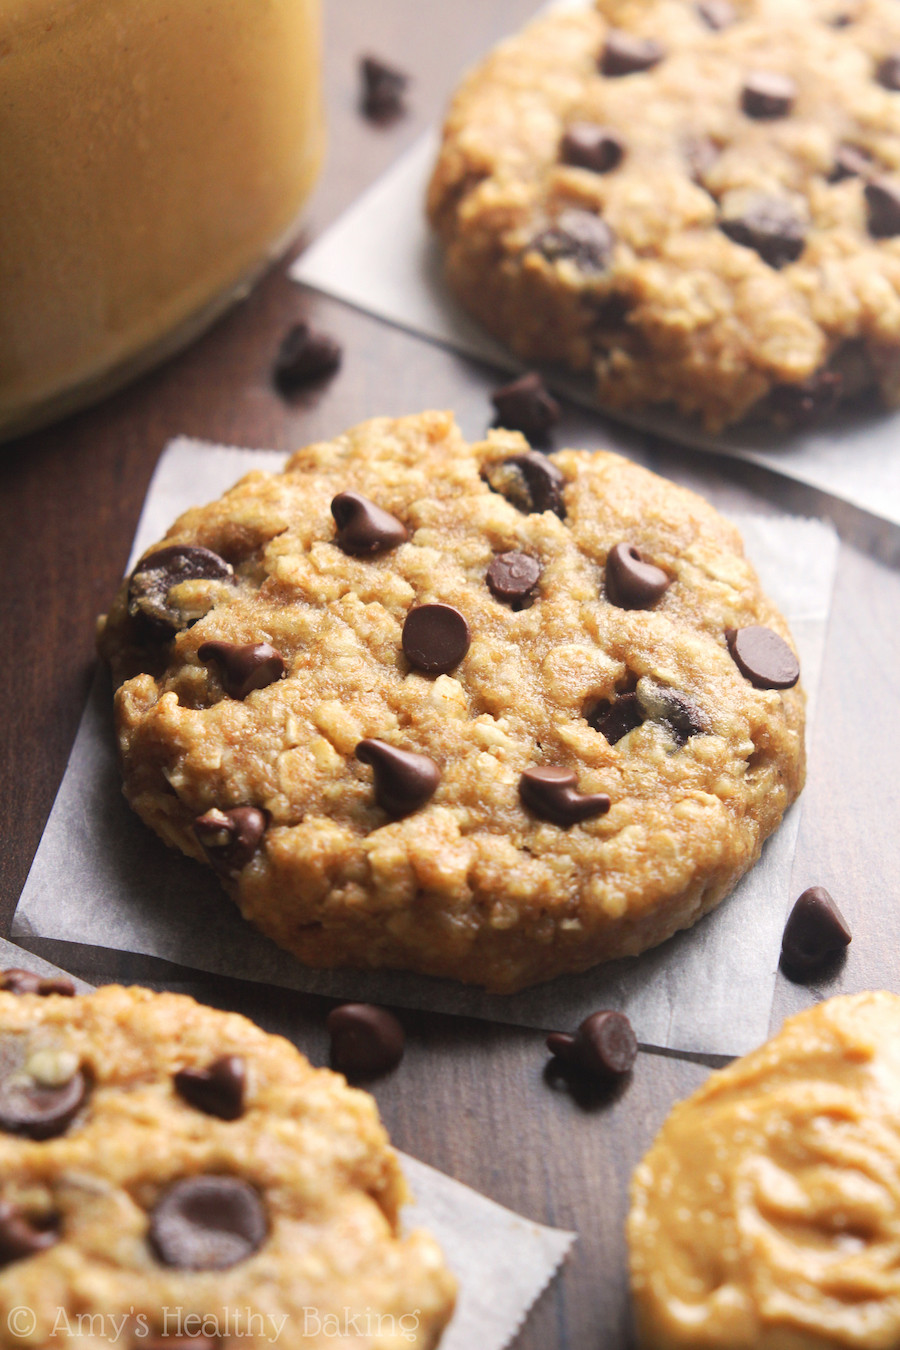 Peanut Butter Chocolate Chip Oatmeal Cookies
 Chocolate Chip Peanut Butter Oatmeal Cookies Recipe Video